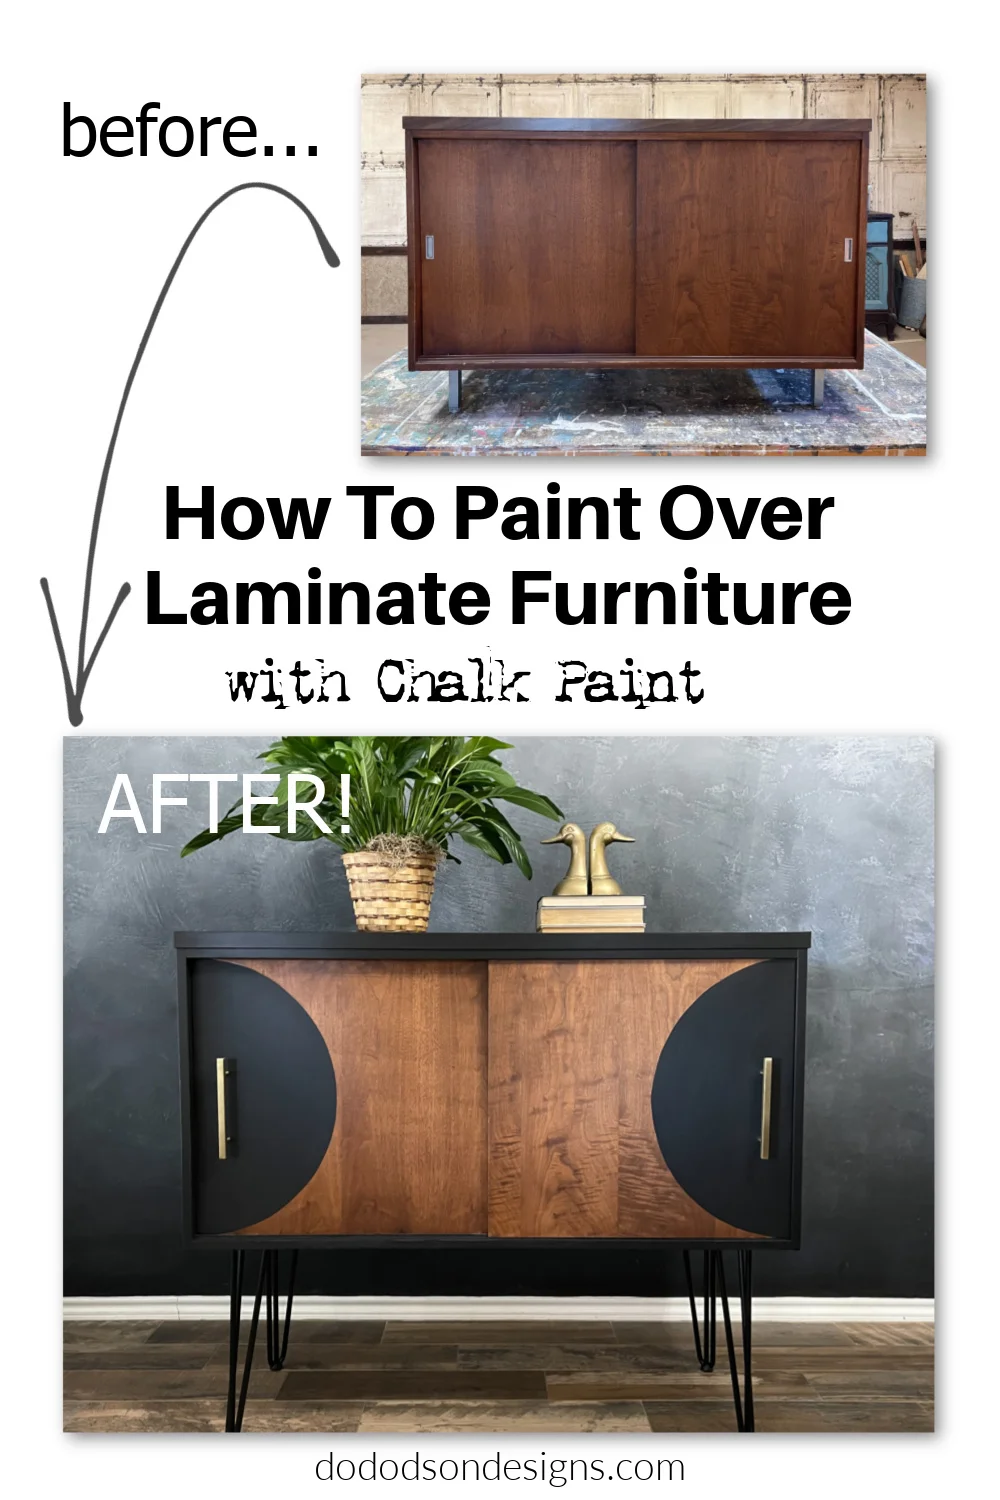 How To Paint Over Laminate Furniture - With Chalk Paint